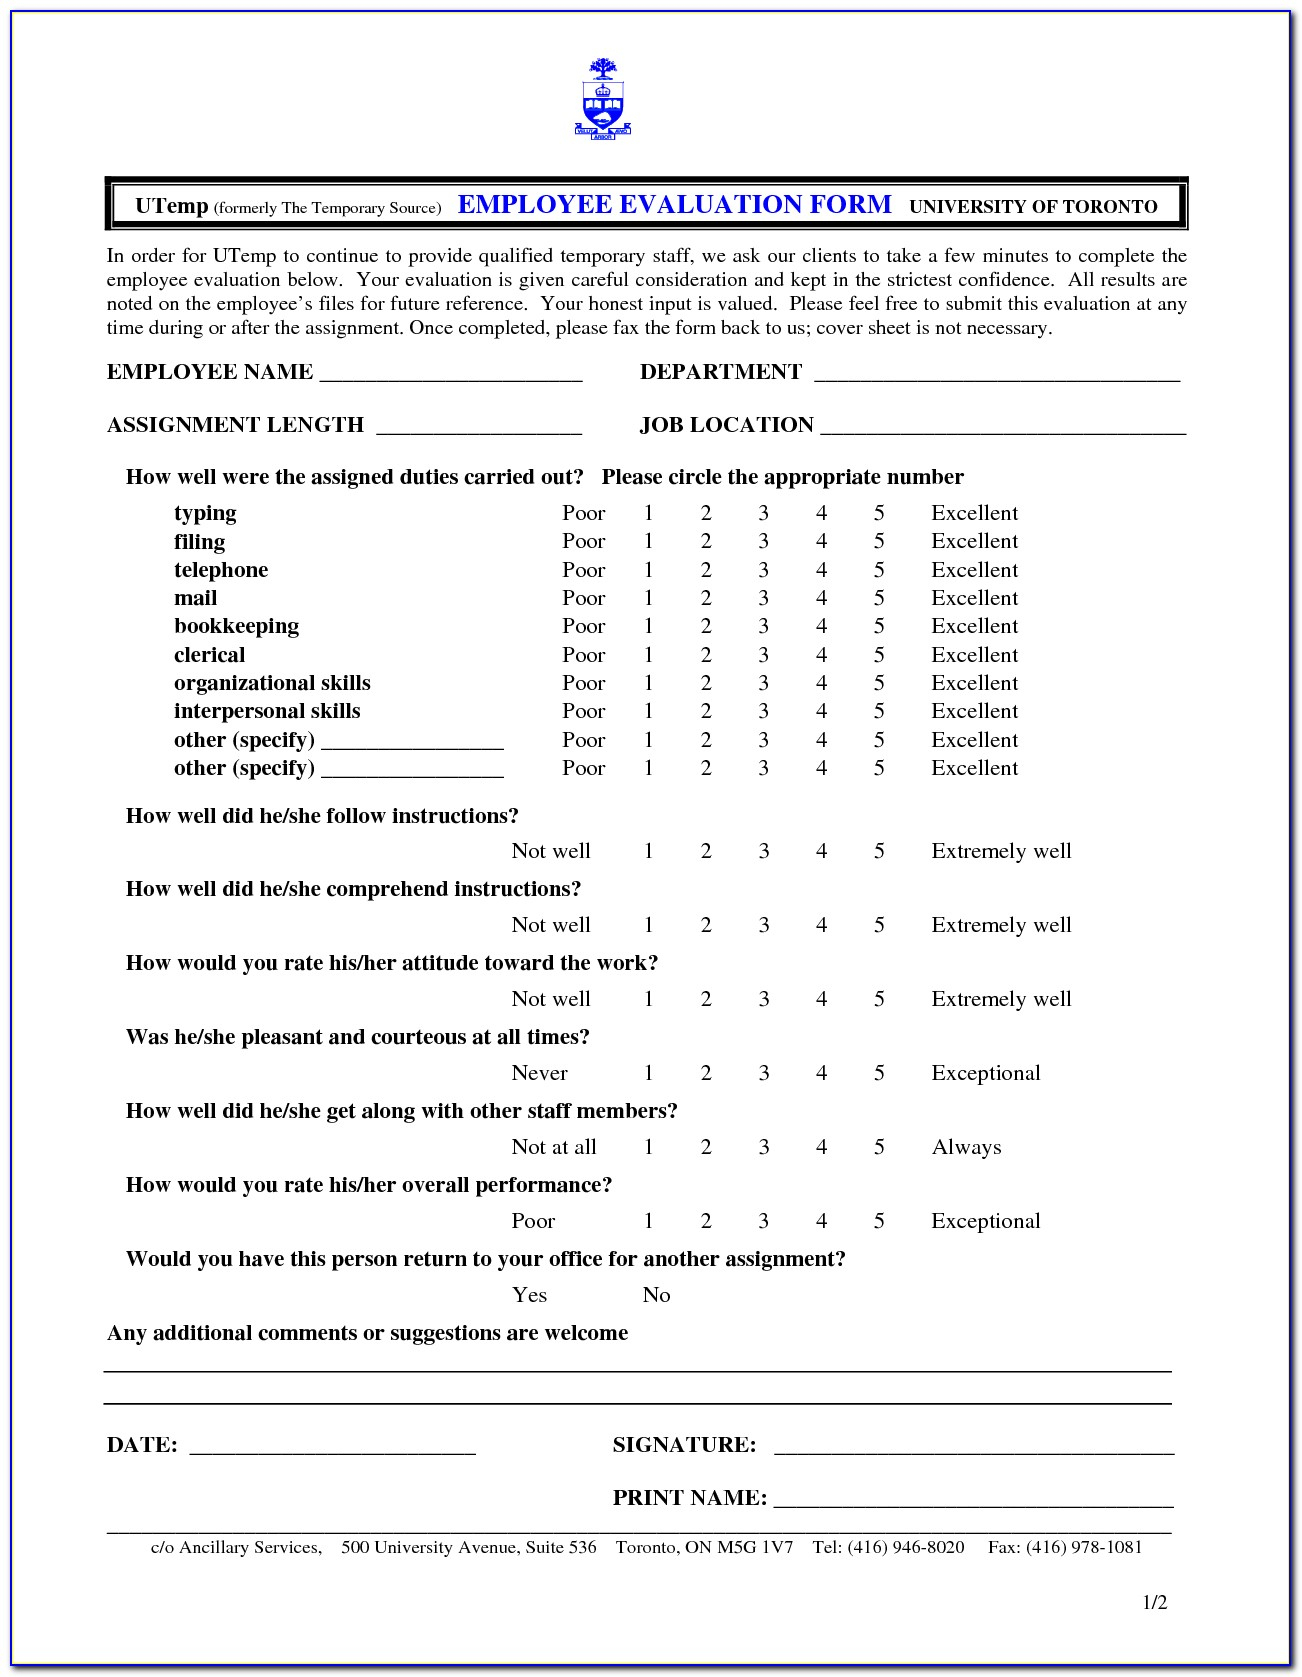 Free Employee Evaluation Forms Printable - Form : Resume Examples - Free Employee Evaluation Forms Printable